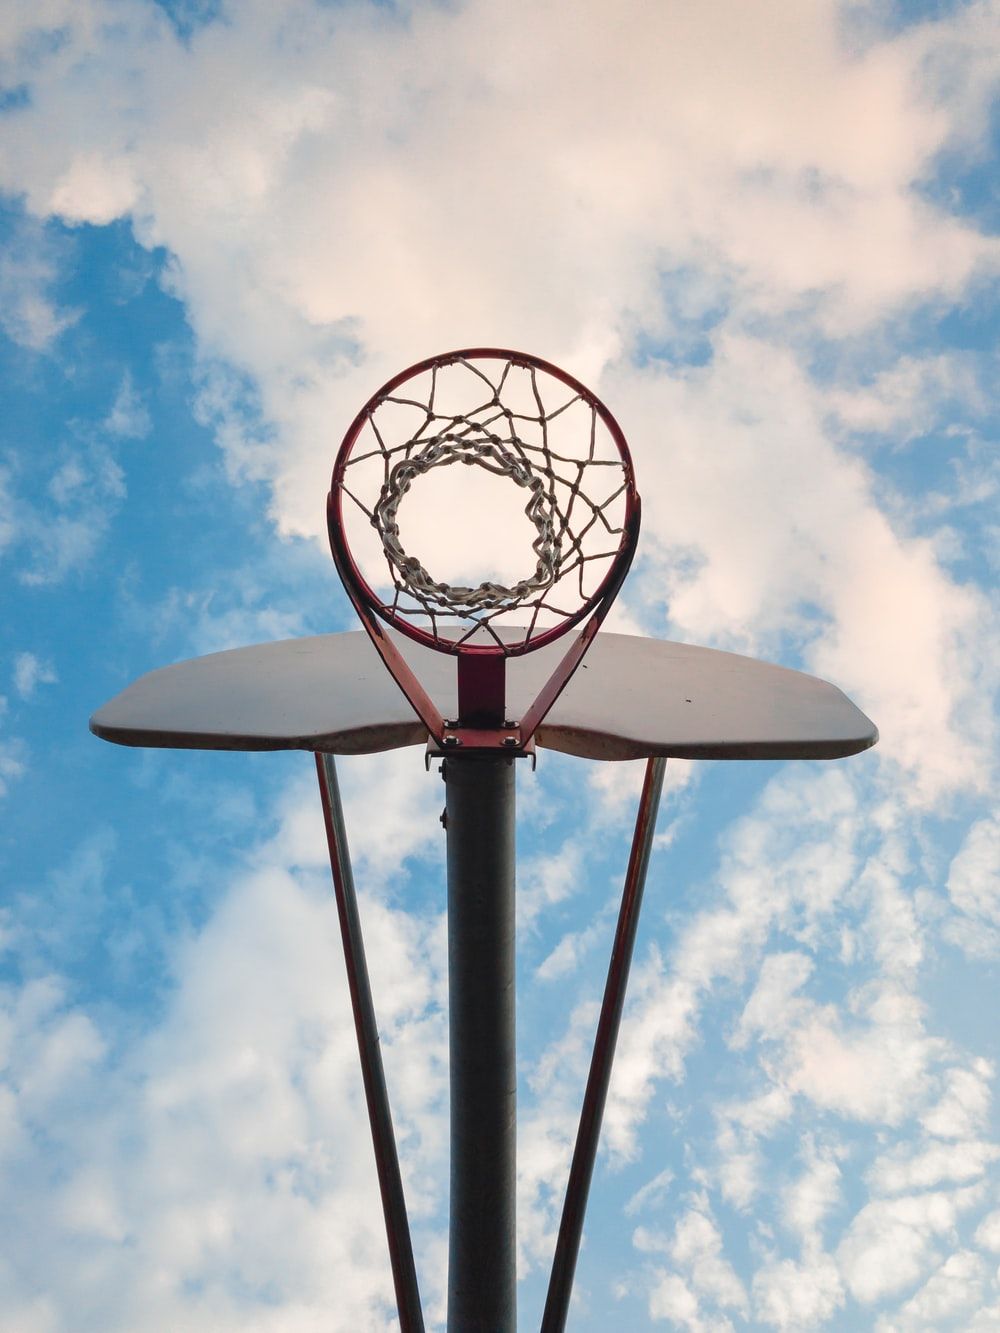 Basketball Rim Picture. Download Free Image